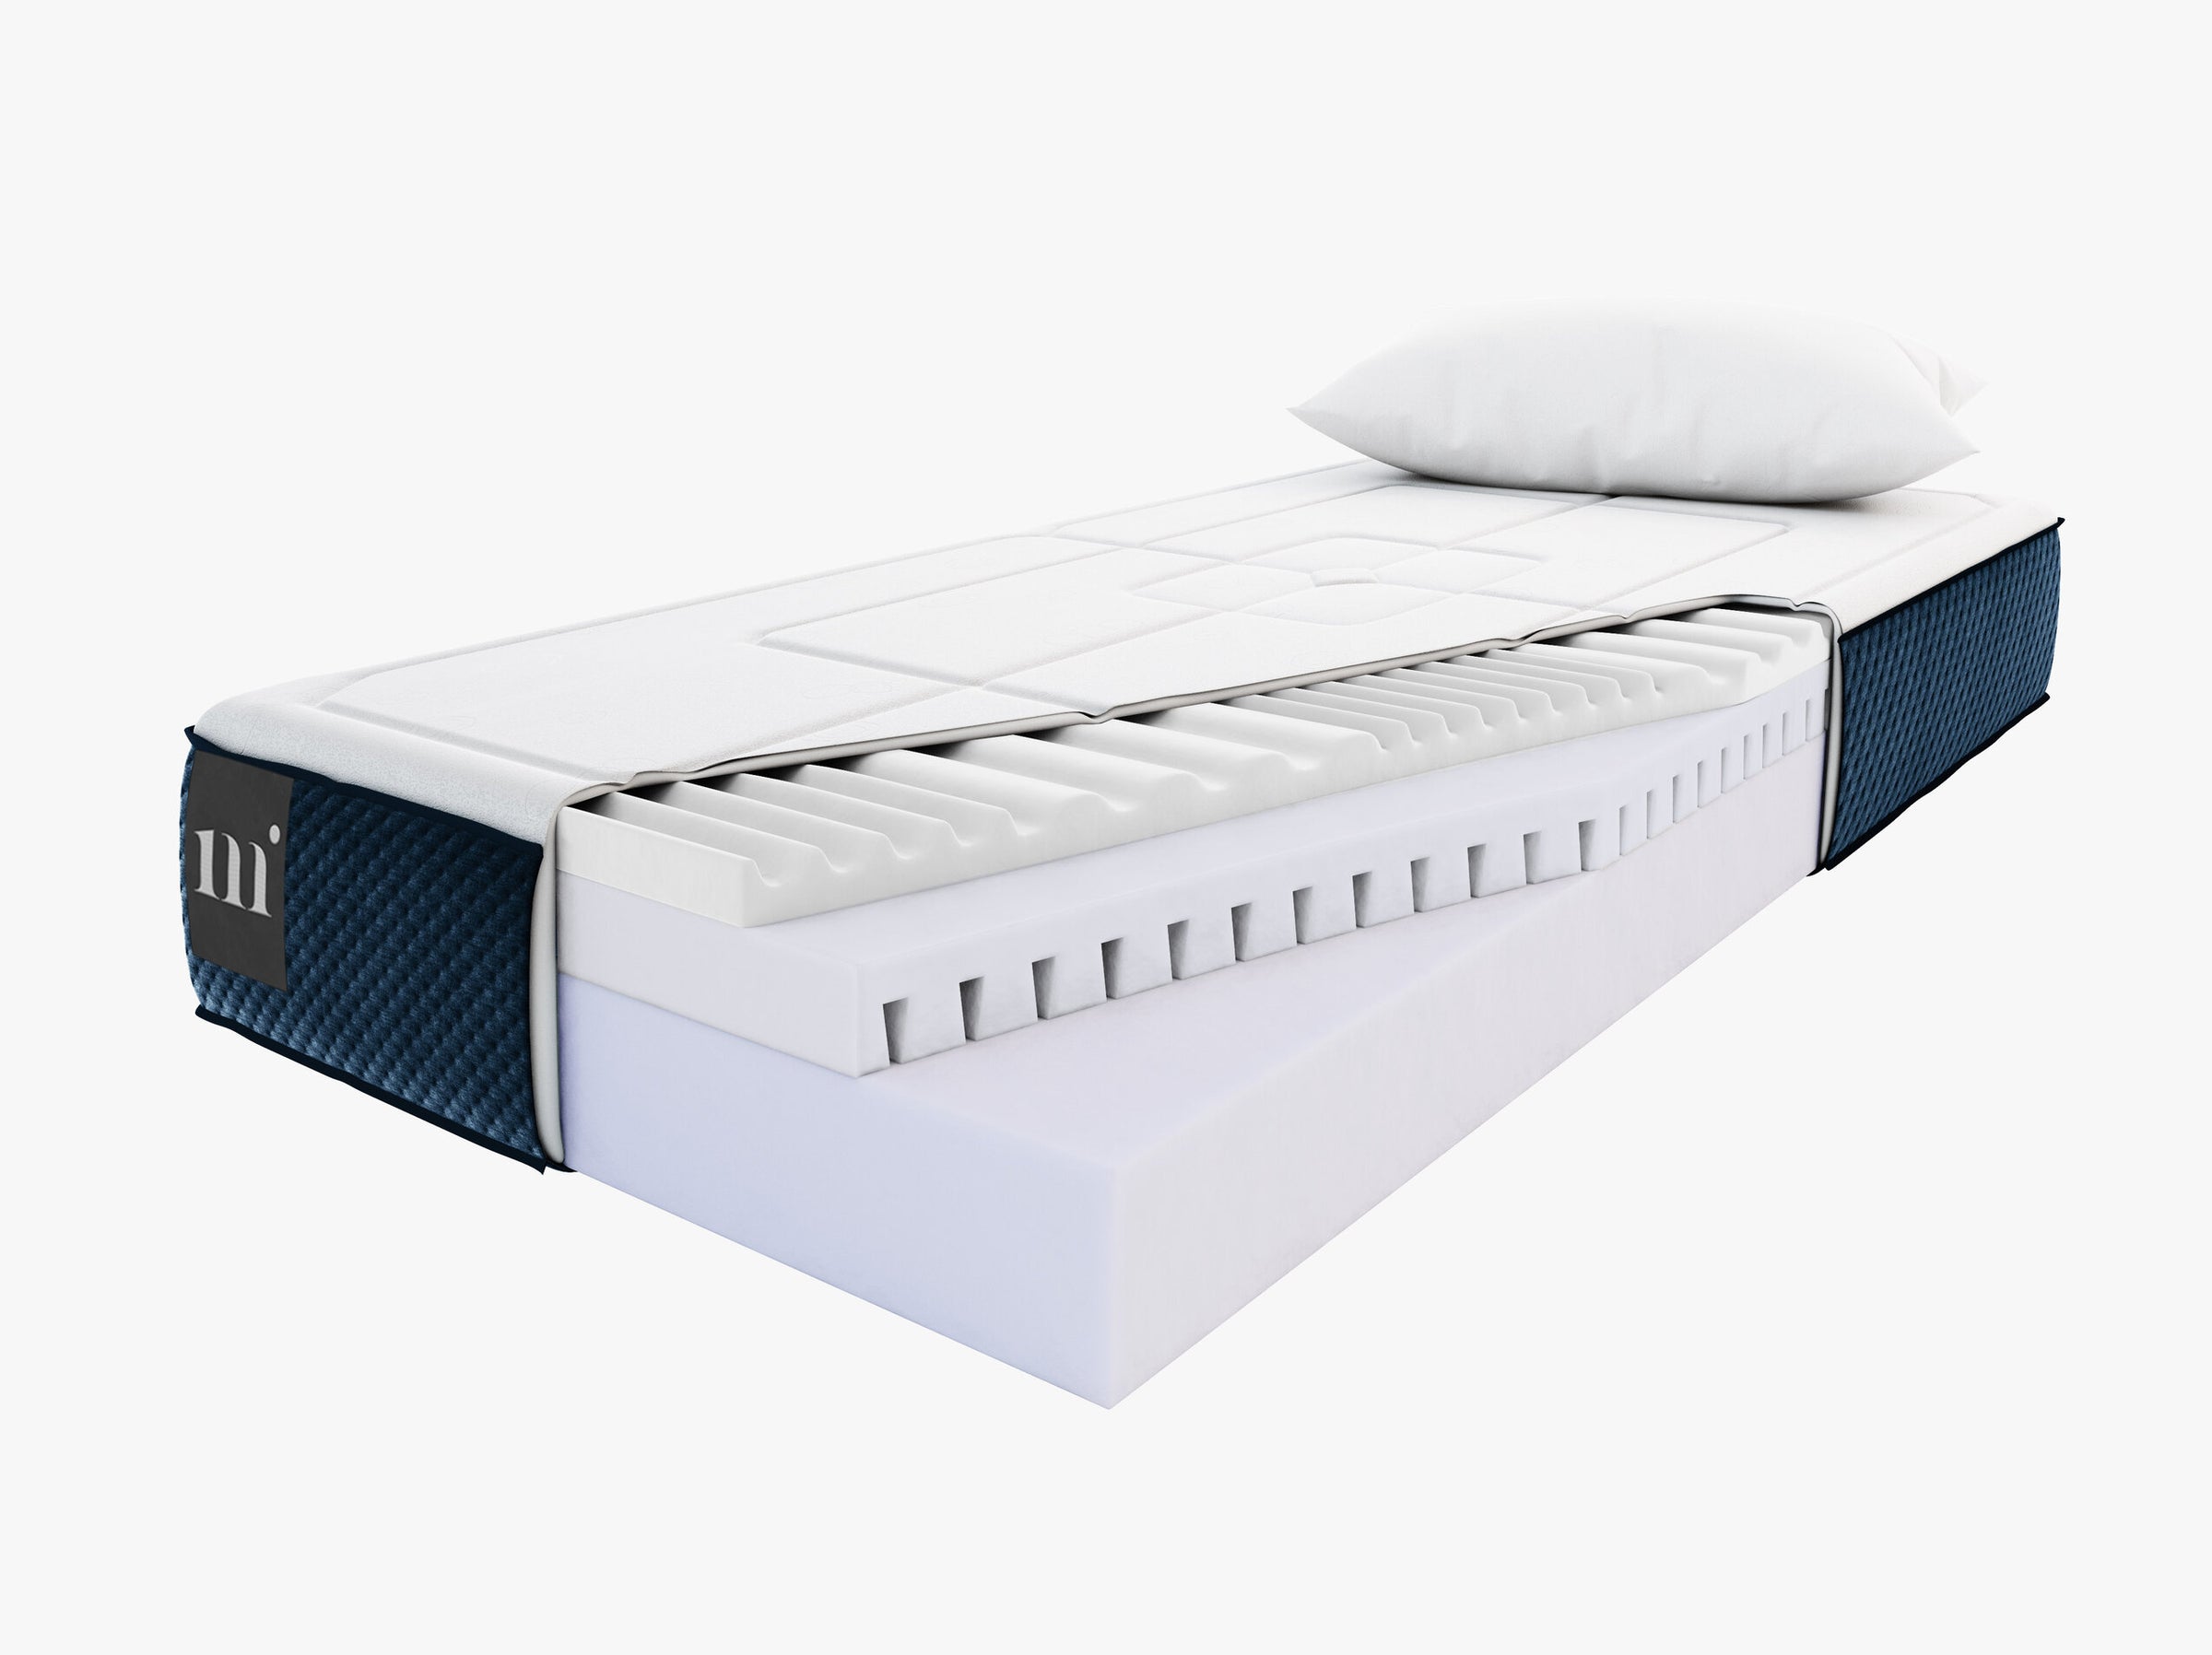 Lorne beds & mattresses structured fabric white and blue